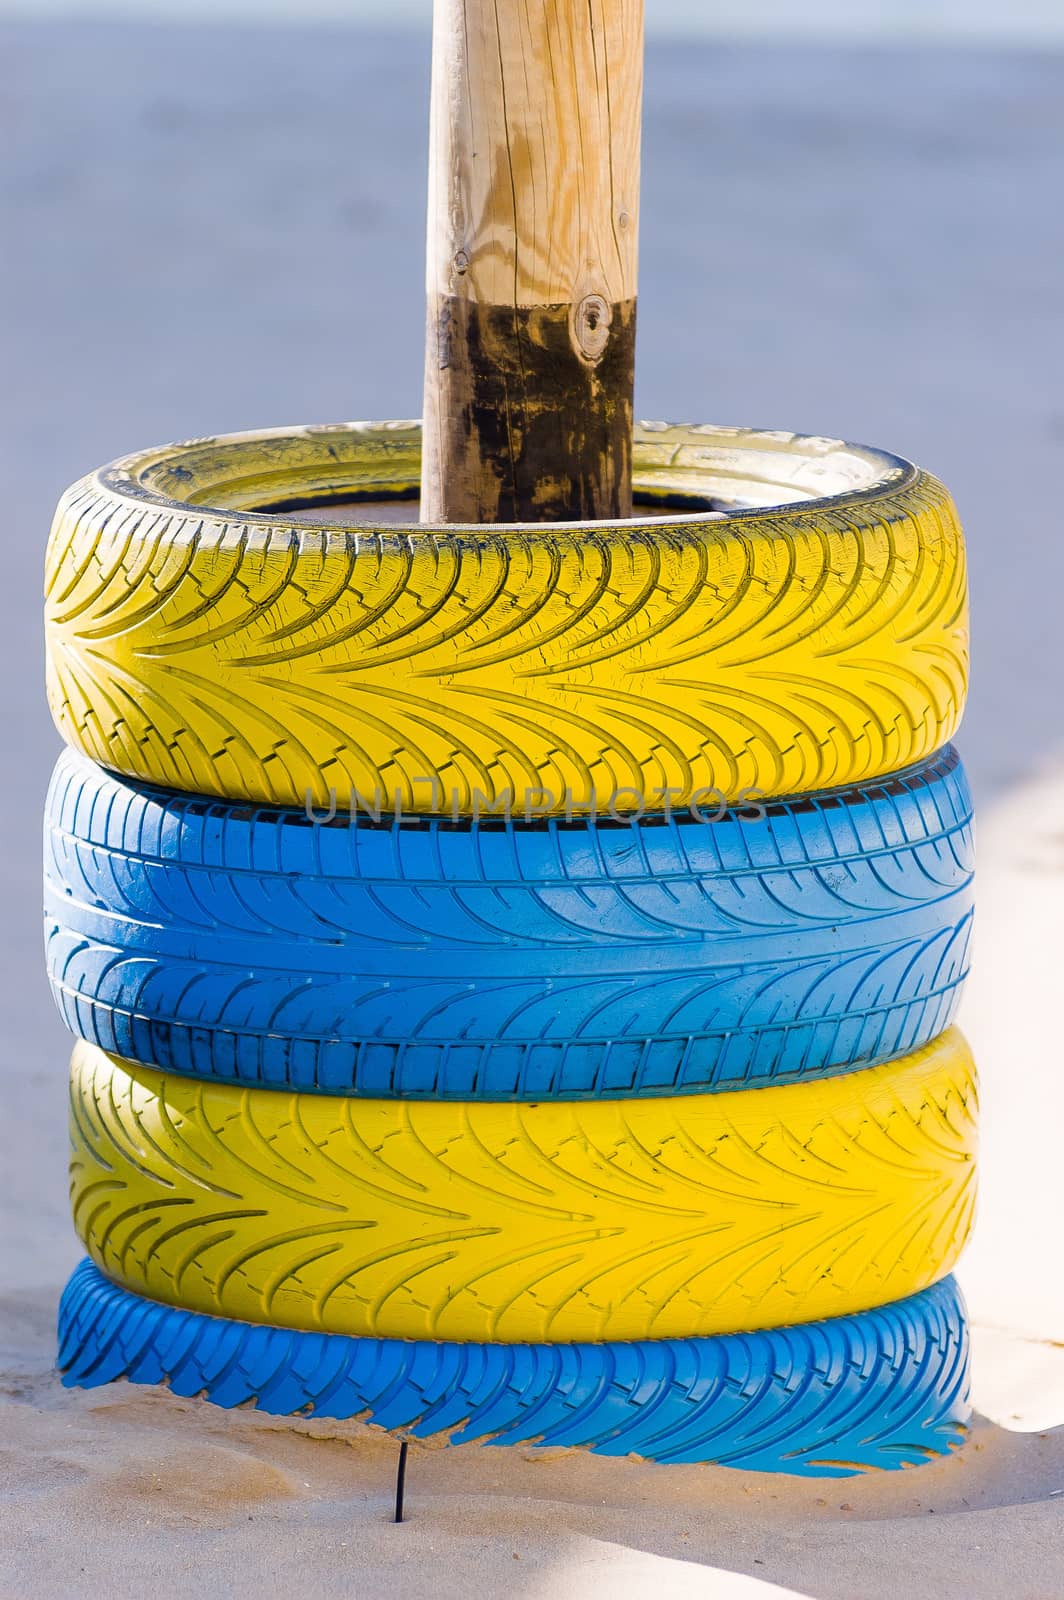 Colored tires by MaxalTamor